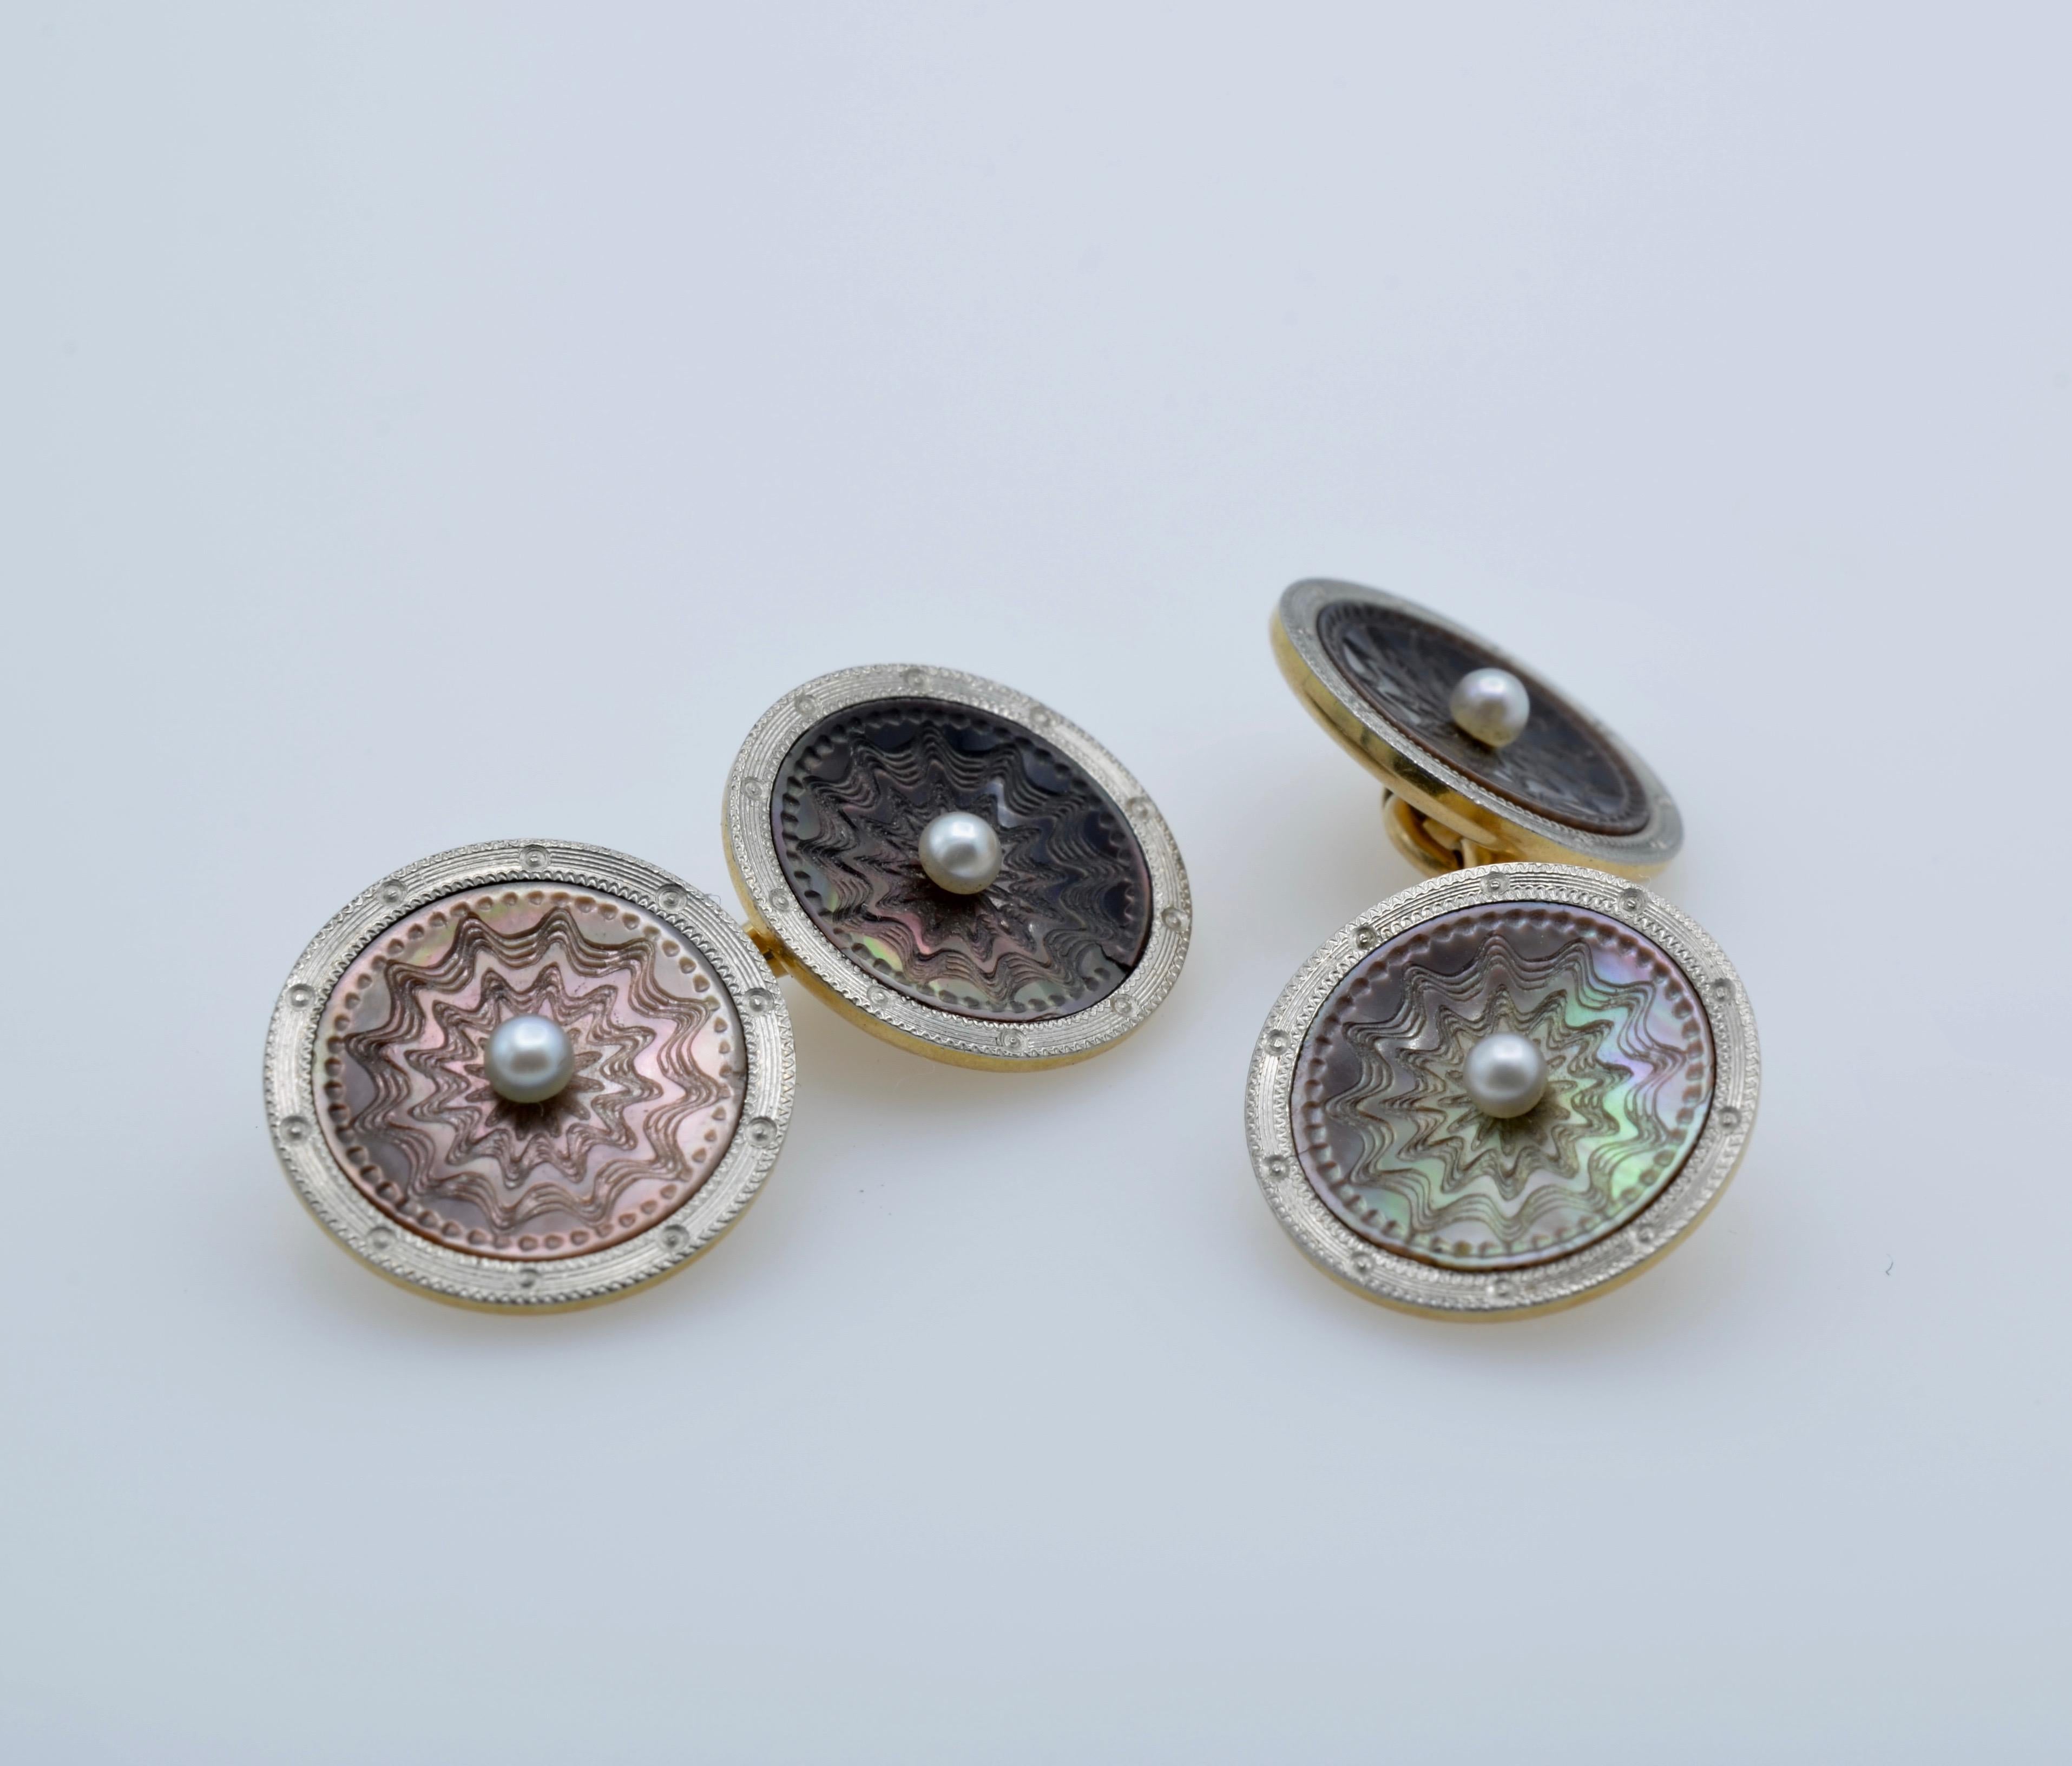 These stunning cuff links are perfect for a gent or a gal.They are feminine enough for the perfect ladies french cuff shirt. They are also stylish and masculine for a tailored man. The mother of pearl is delicately carved and accented by a dainty